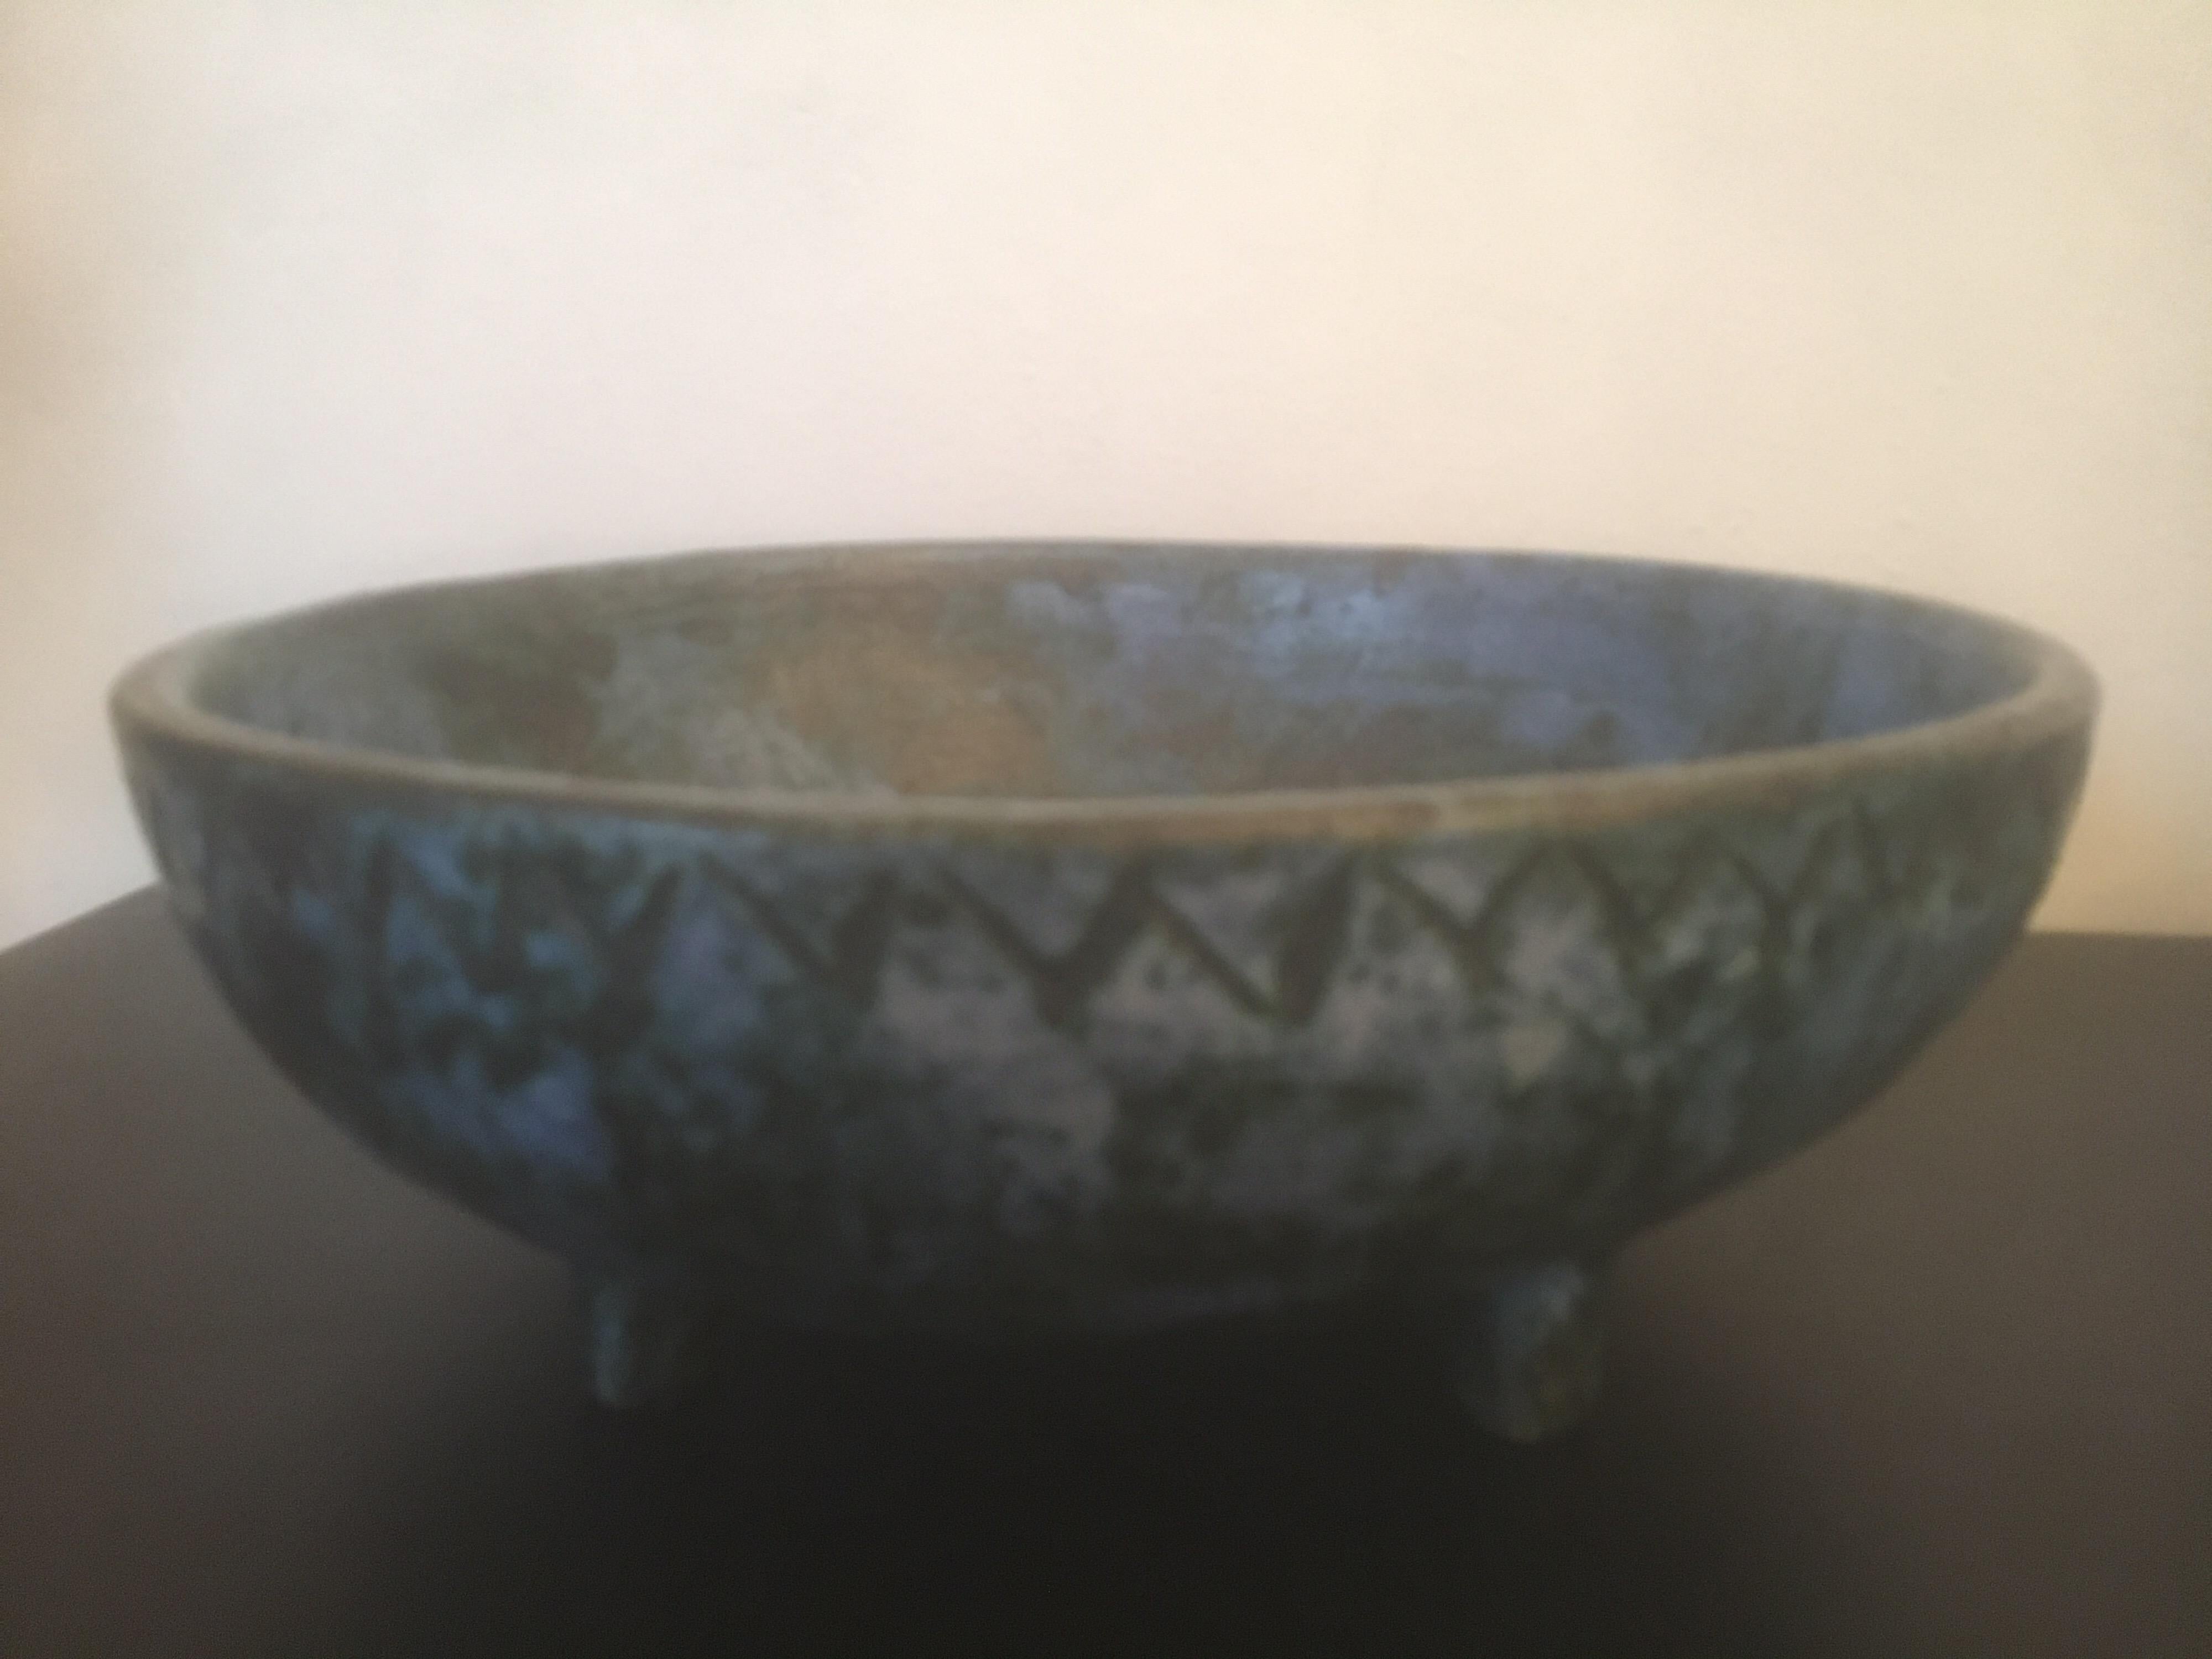 Large ceramic bowl based on four feet, made by Jacques Blin in France in 1960s. Black incised decor on blue background.
Marked J Blin underside.
In very good condition
Jacques Blin (1920-1995) is a famous French ceramist
Documentation: Histoire